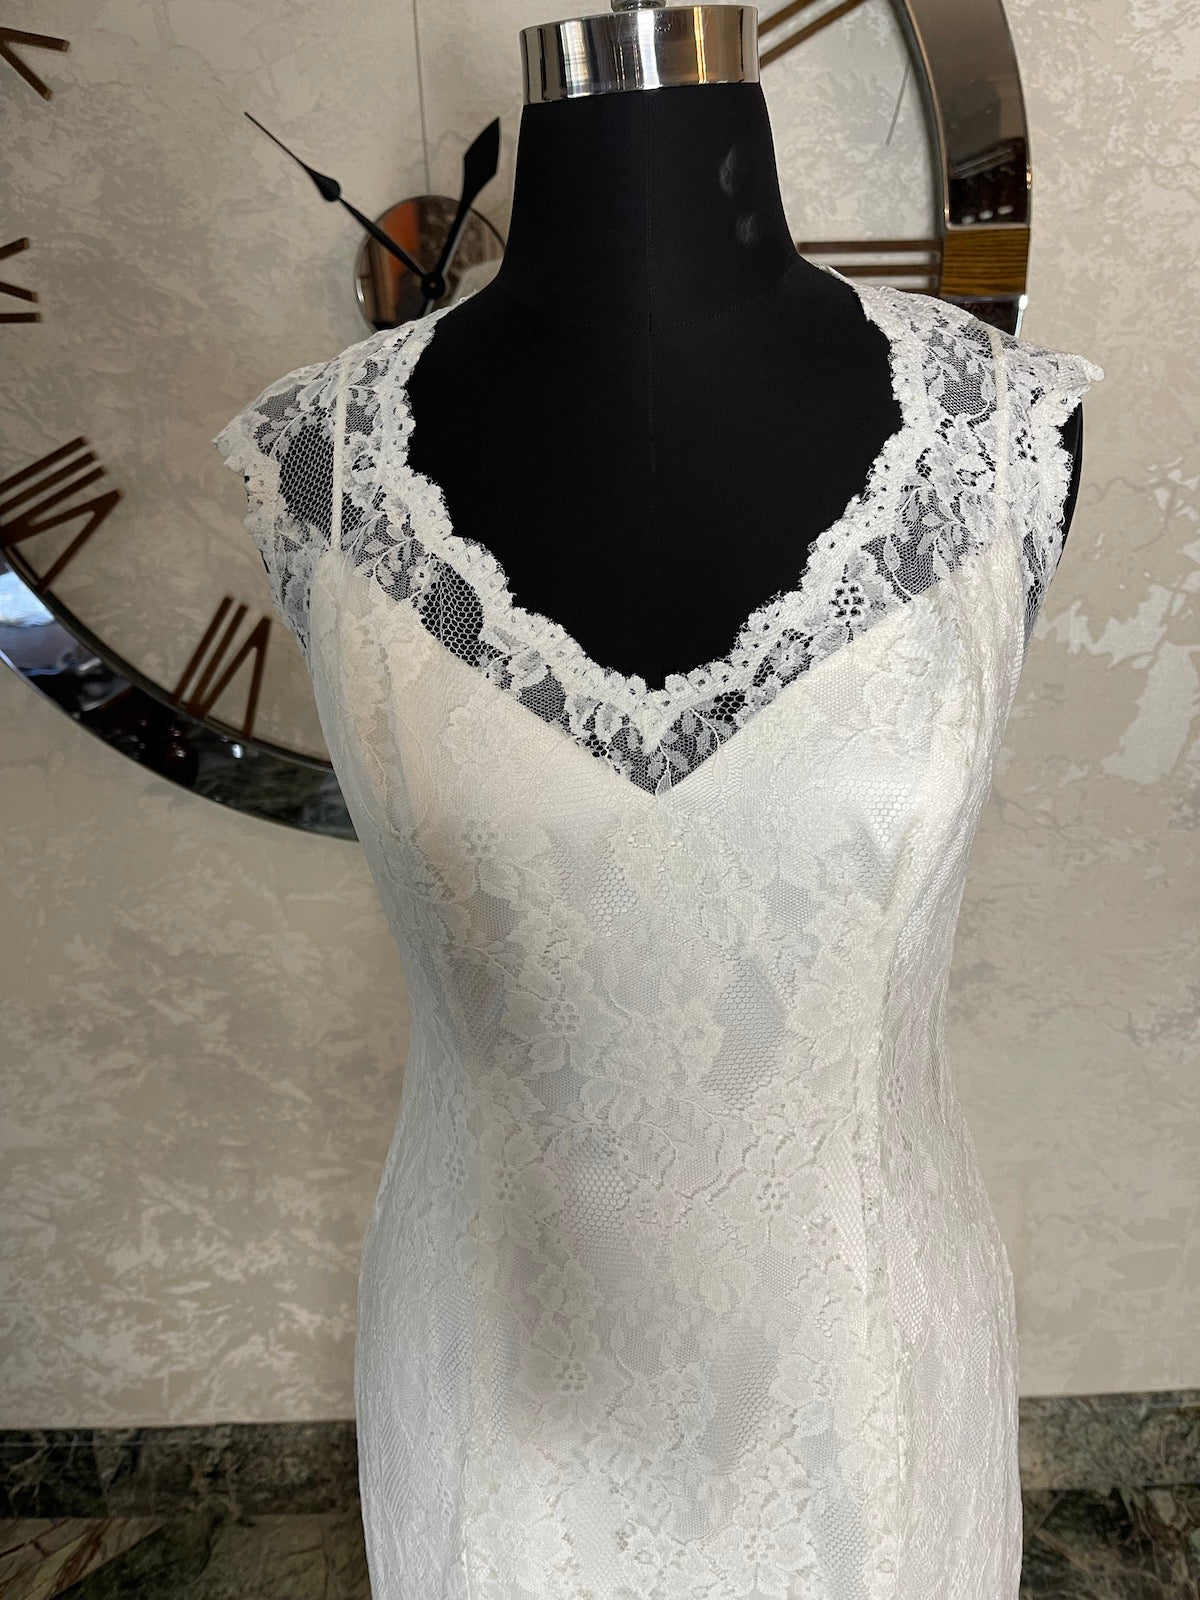 Dress with Lace Overlay, A 2-in-1 design. V neckline Bridal Dress - #6101